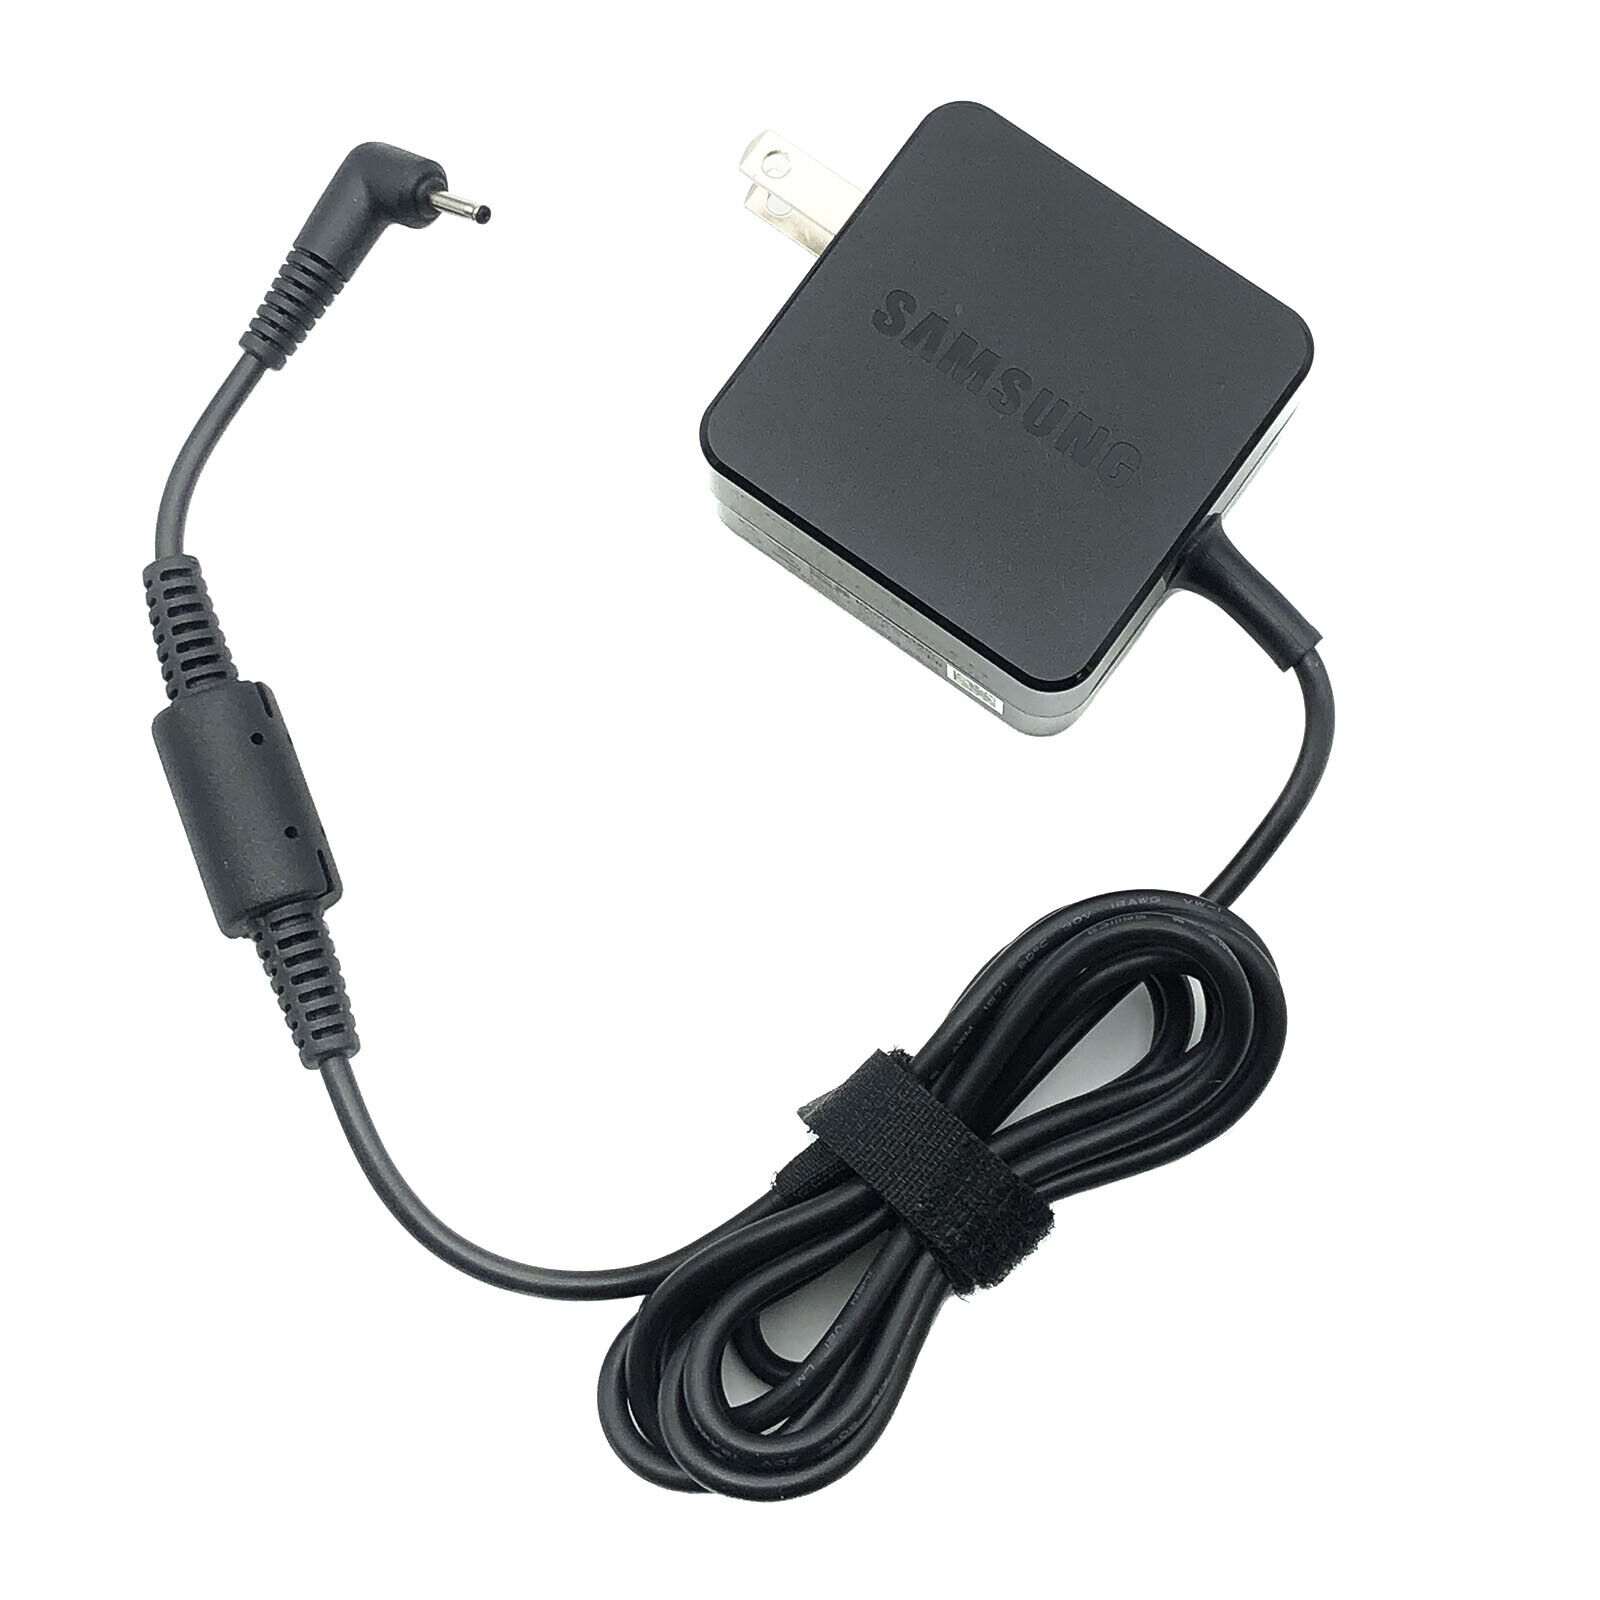 Genuine Samsung AC/DC Adapter for Samsung N-Series Laptops w/Power Cord